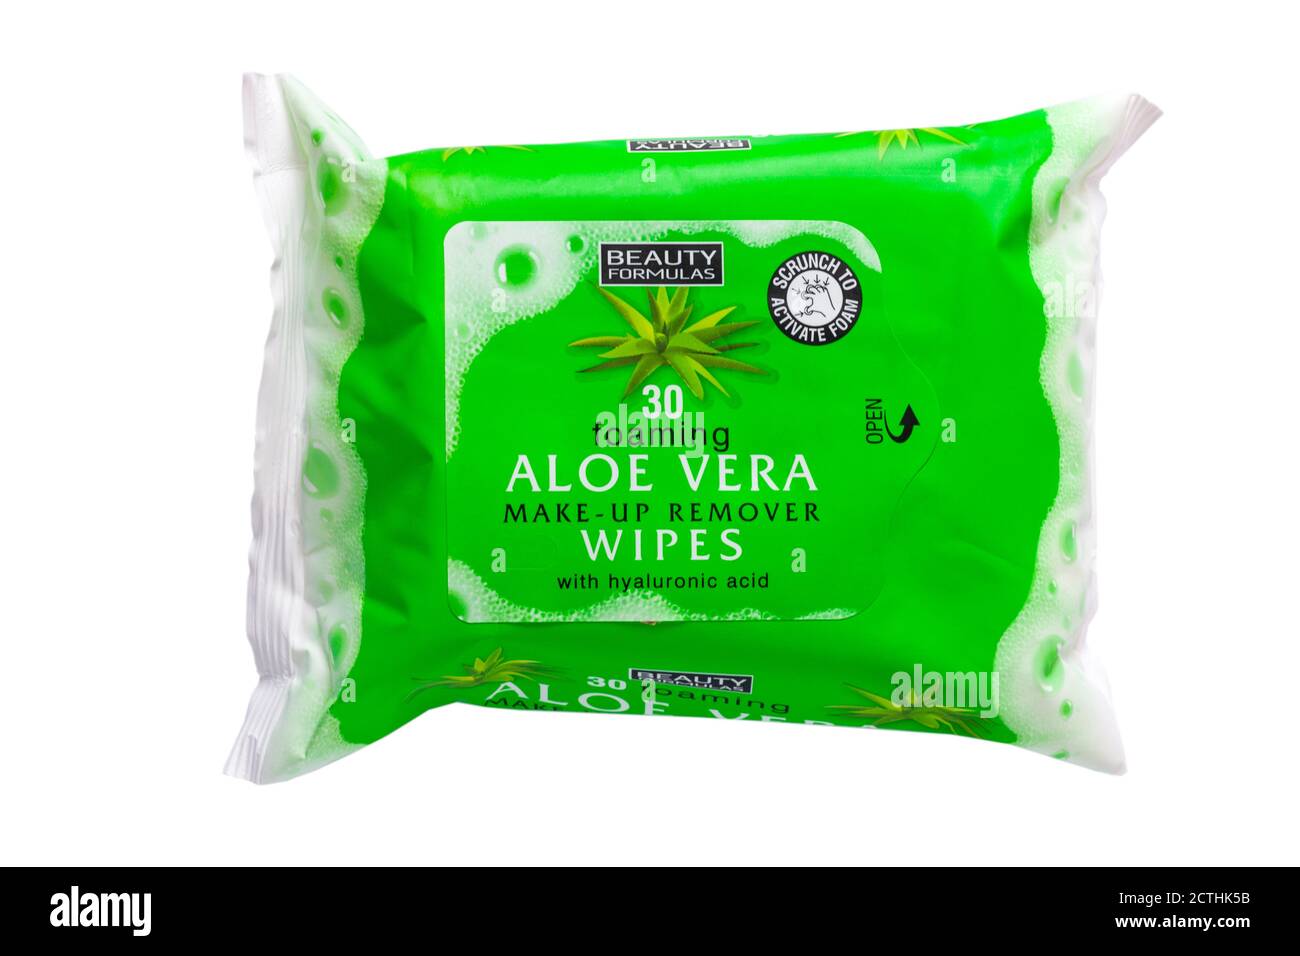 Packet of beauty formulas foaming Aloe Vera make-up remover wipes with hyaluronic acid isolated on white background - scrunch to activate foam Stock Photo